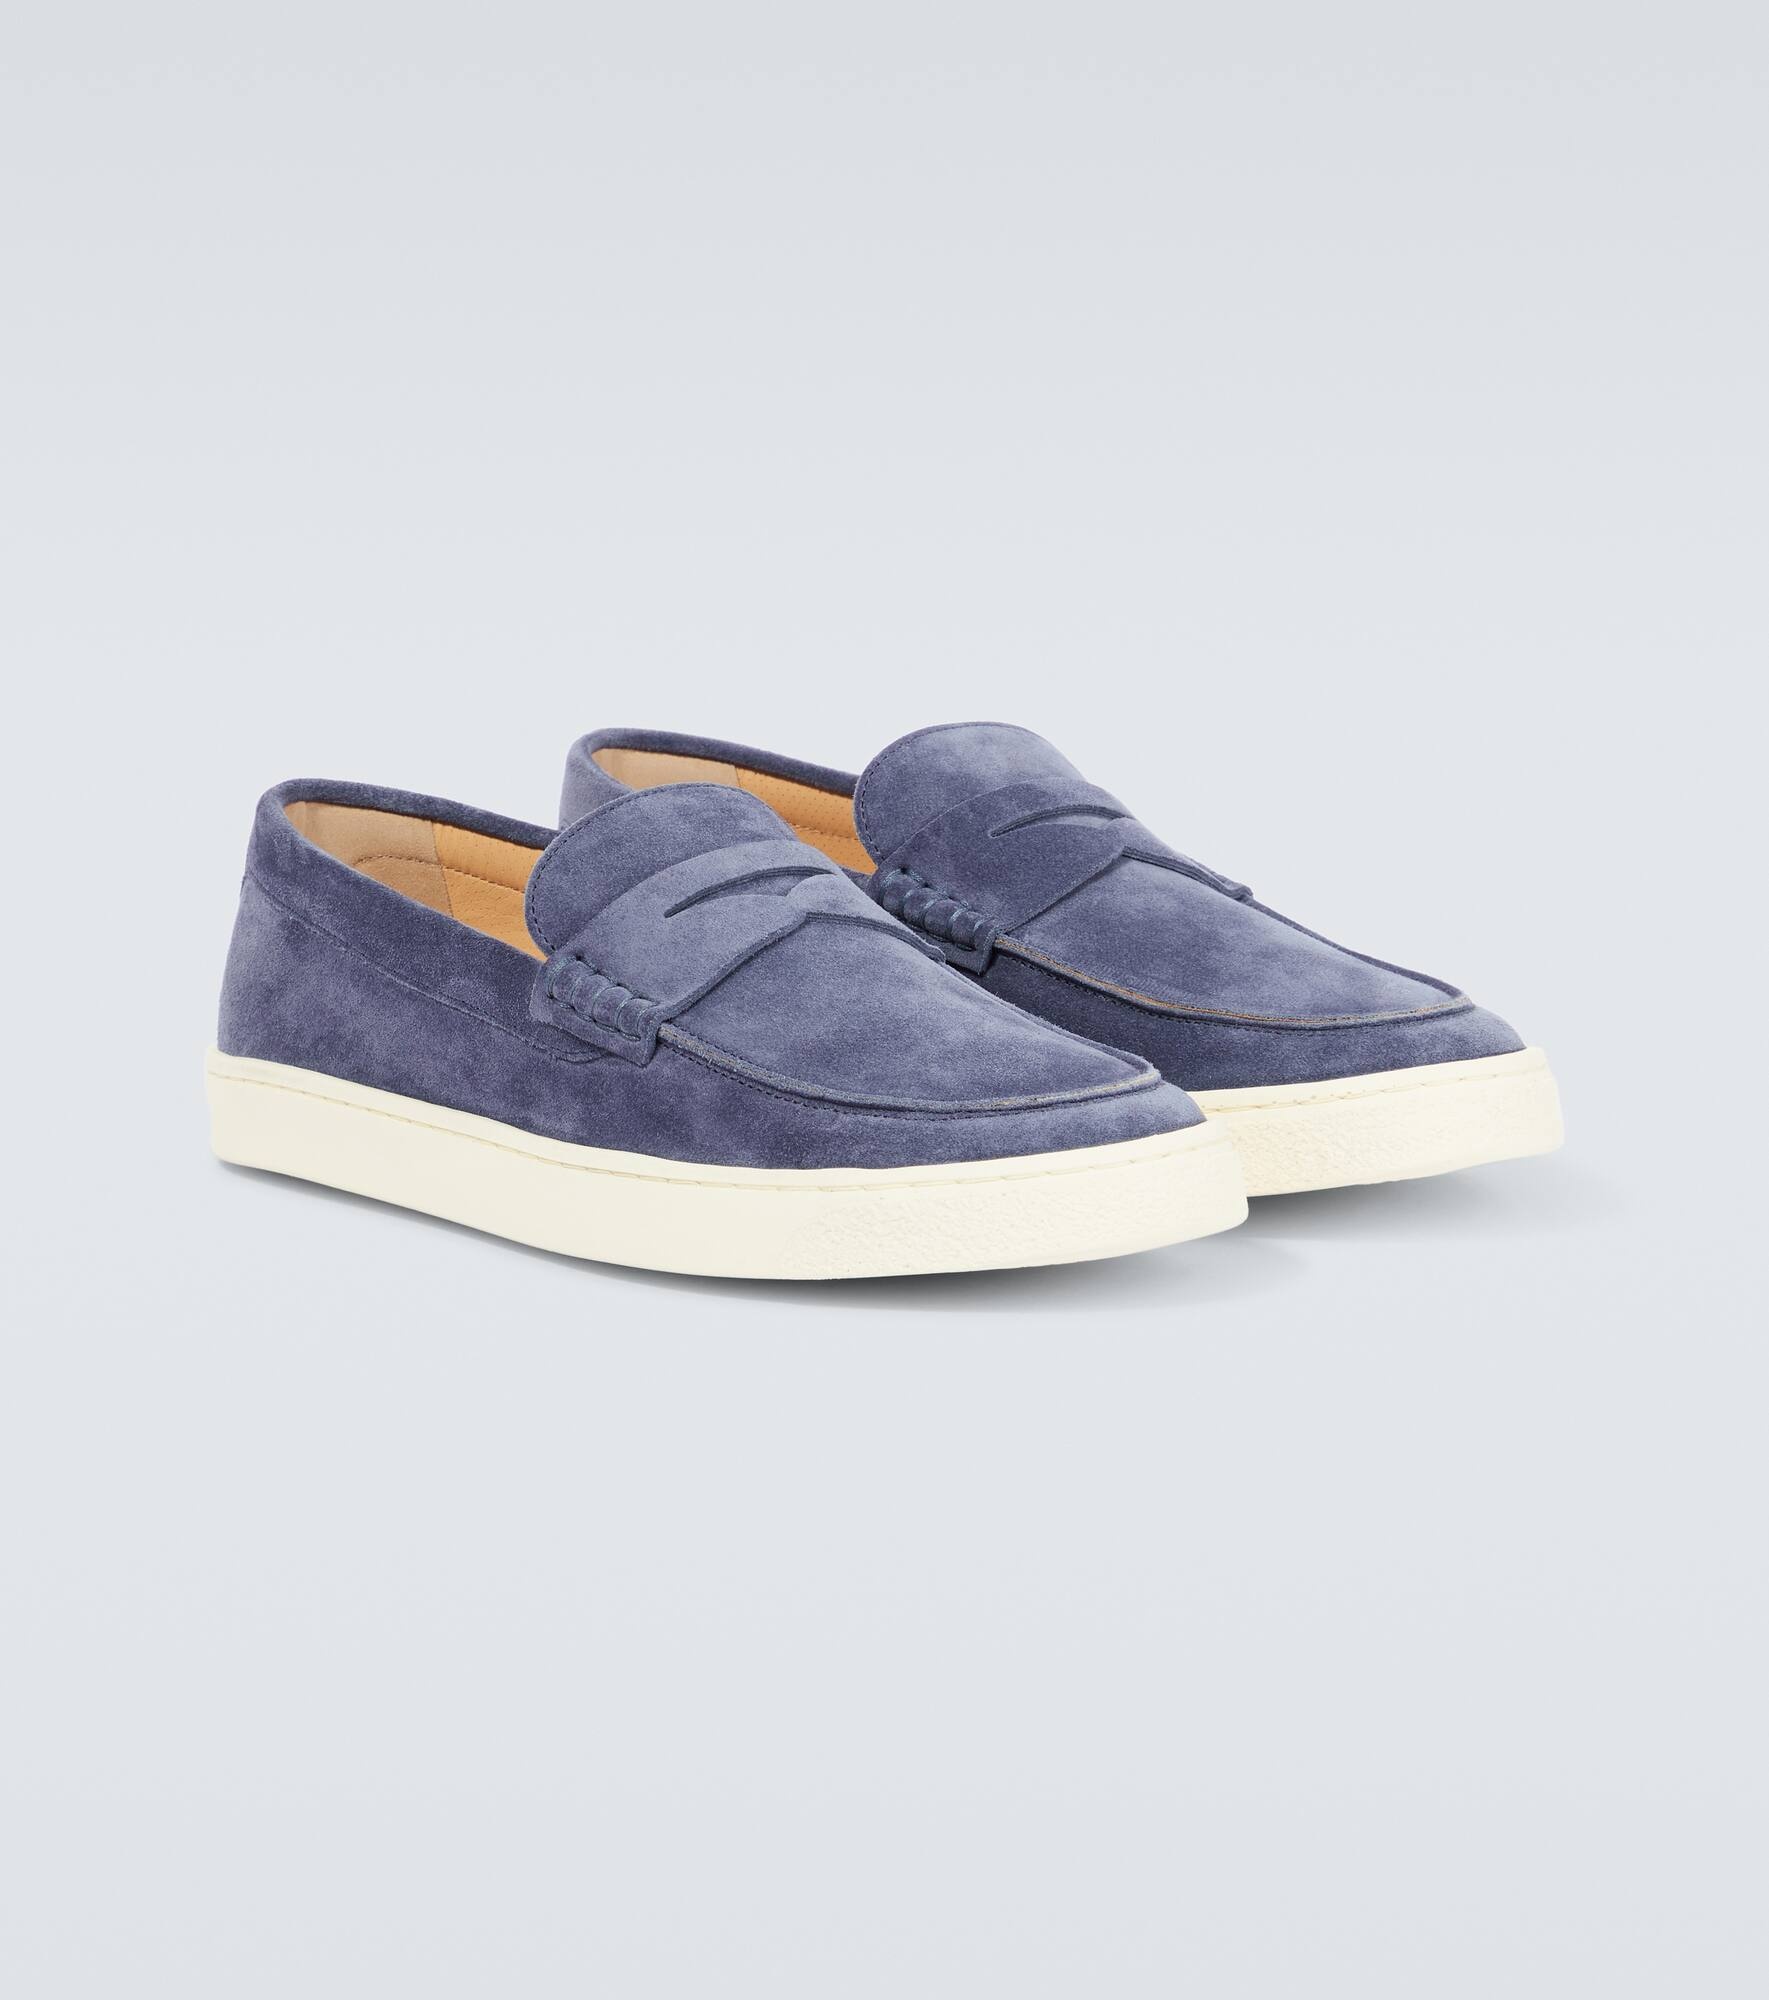 Suede penny loafers - 5